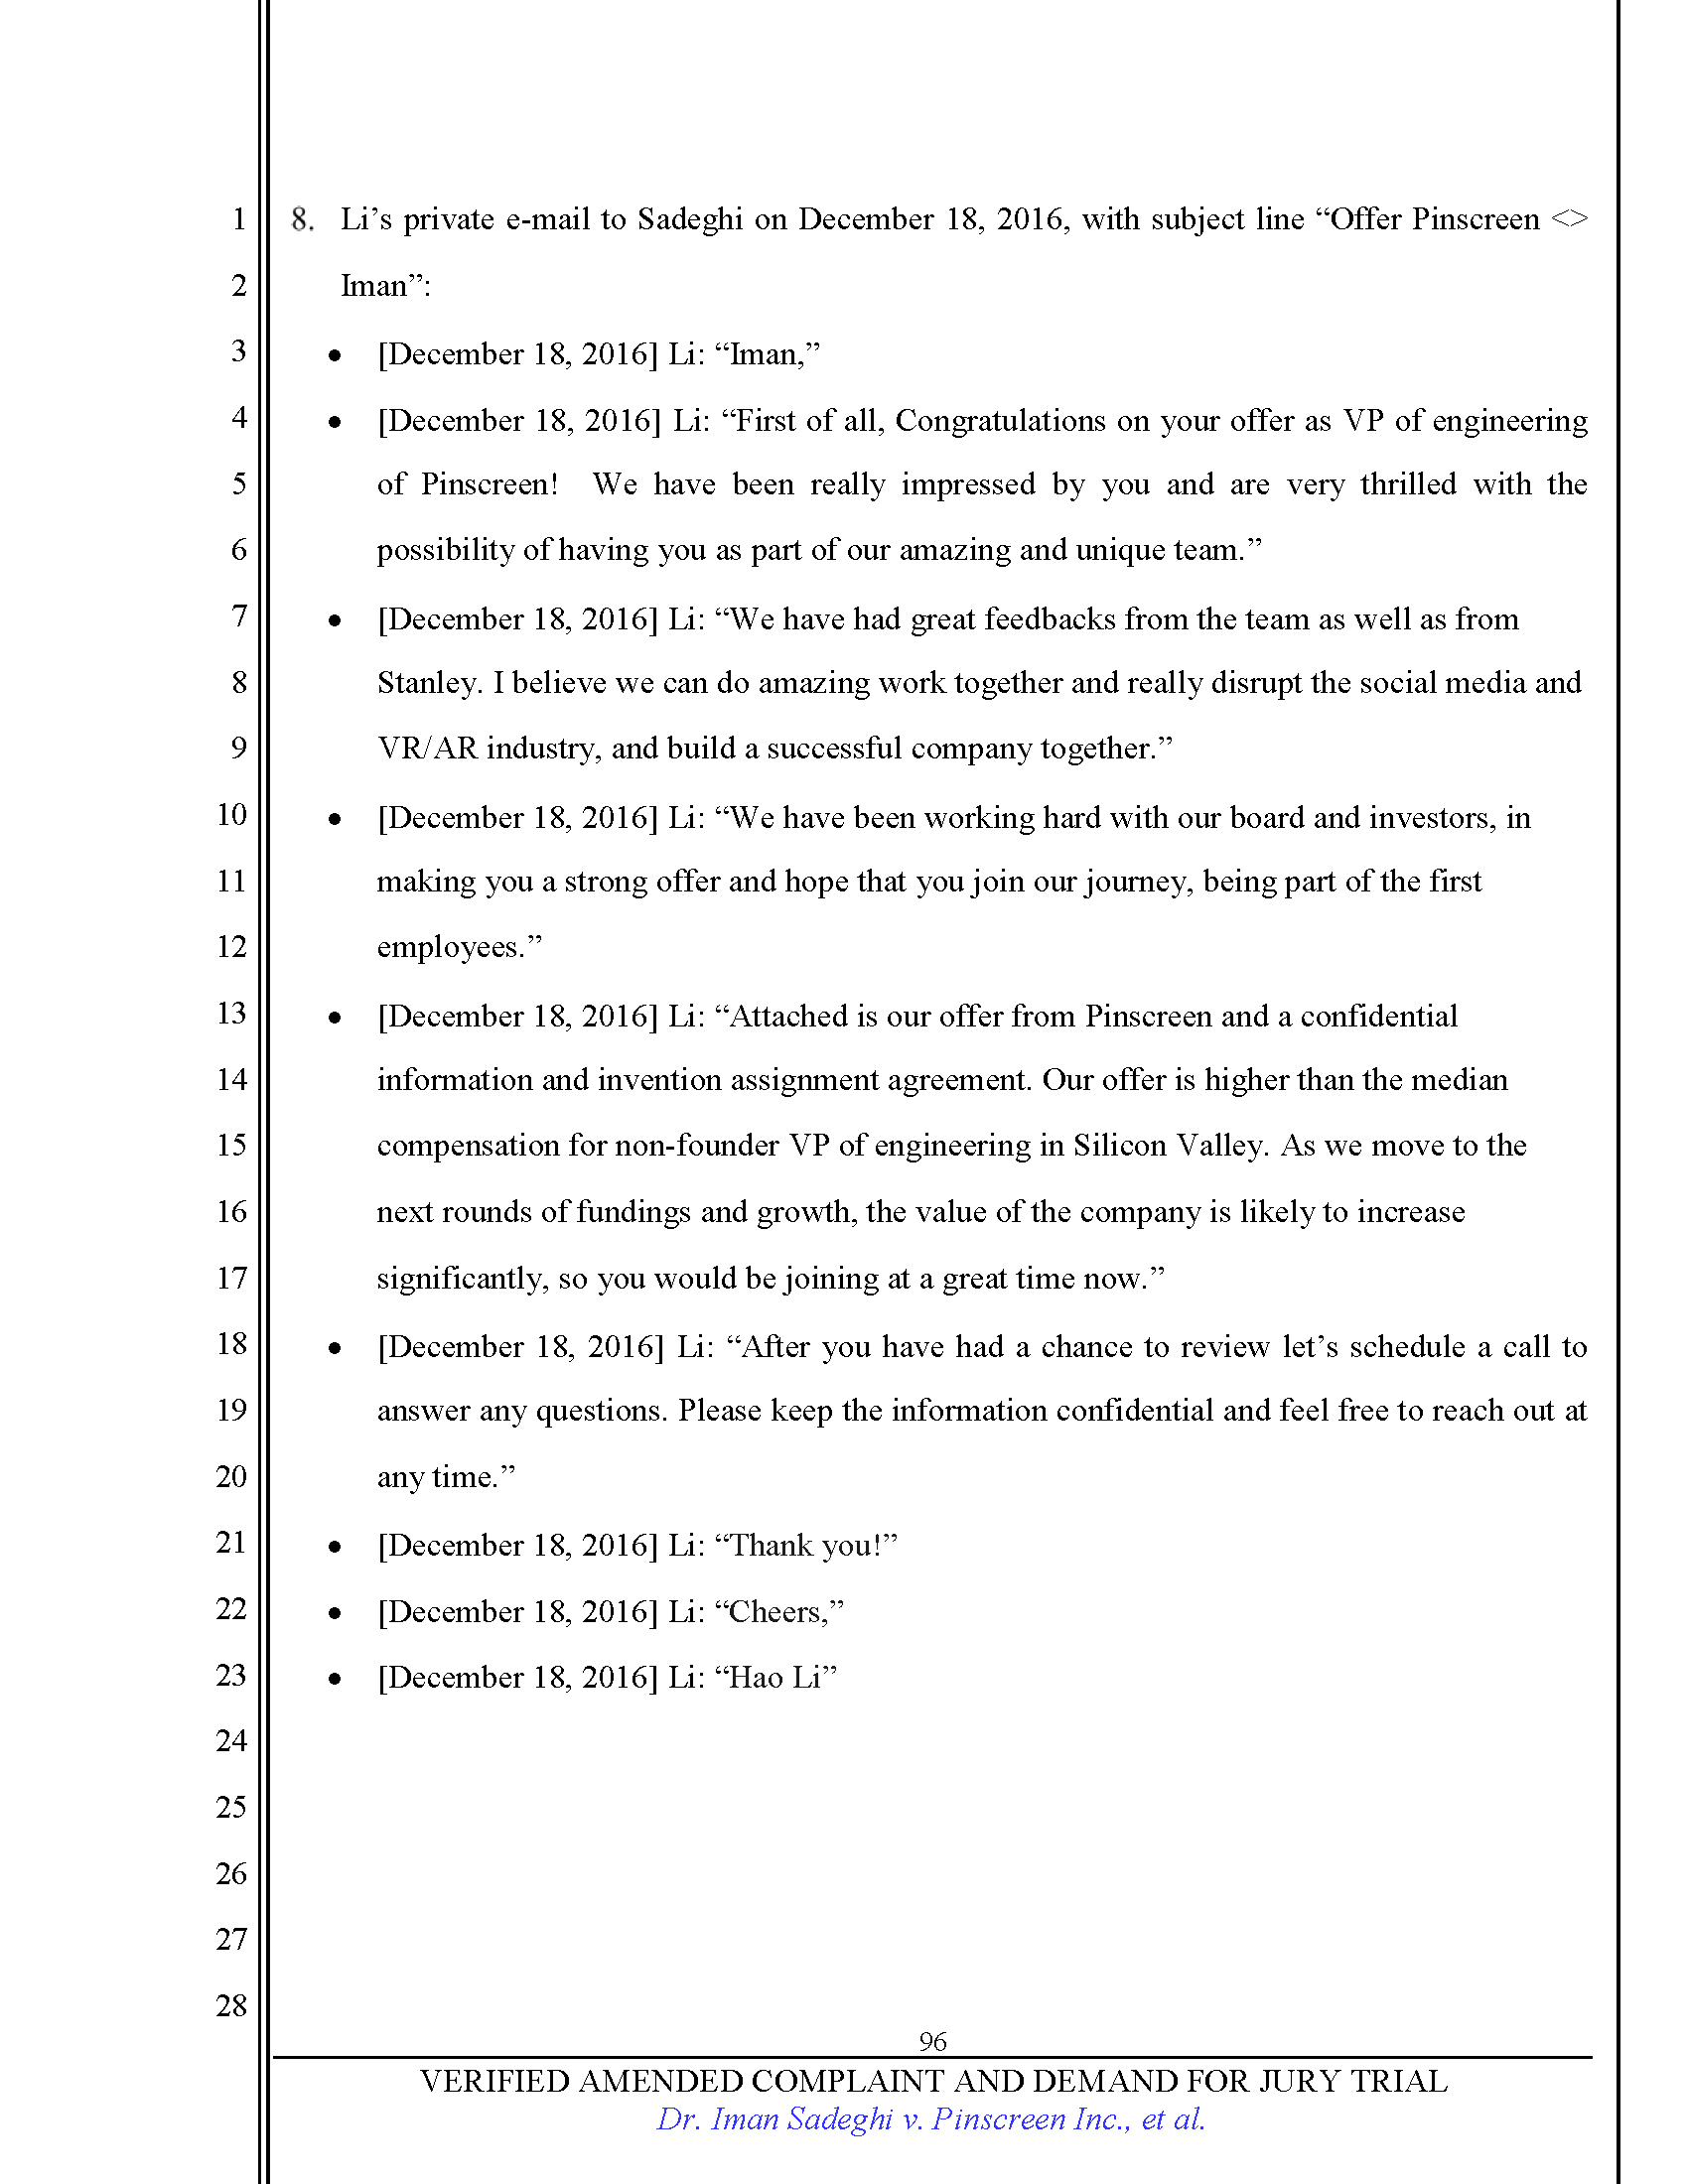 First Amended Complaint (FAC) Page 96